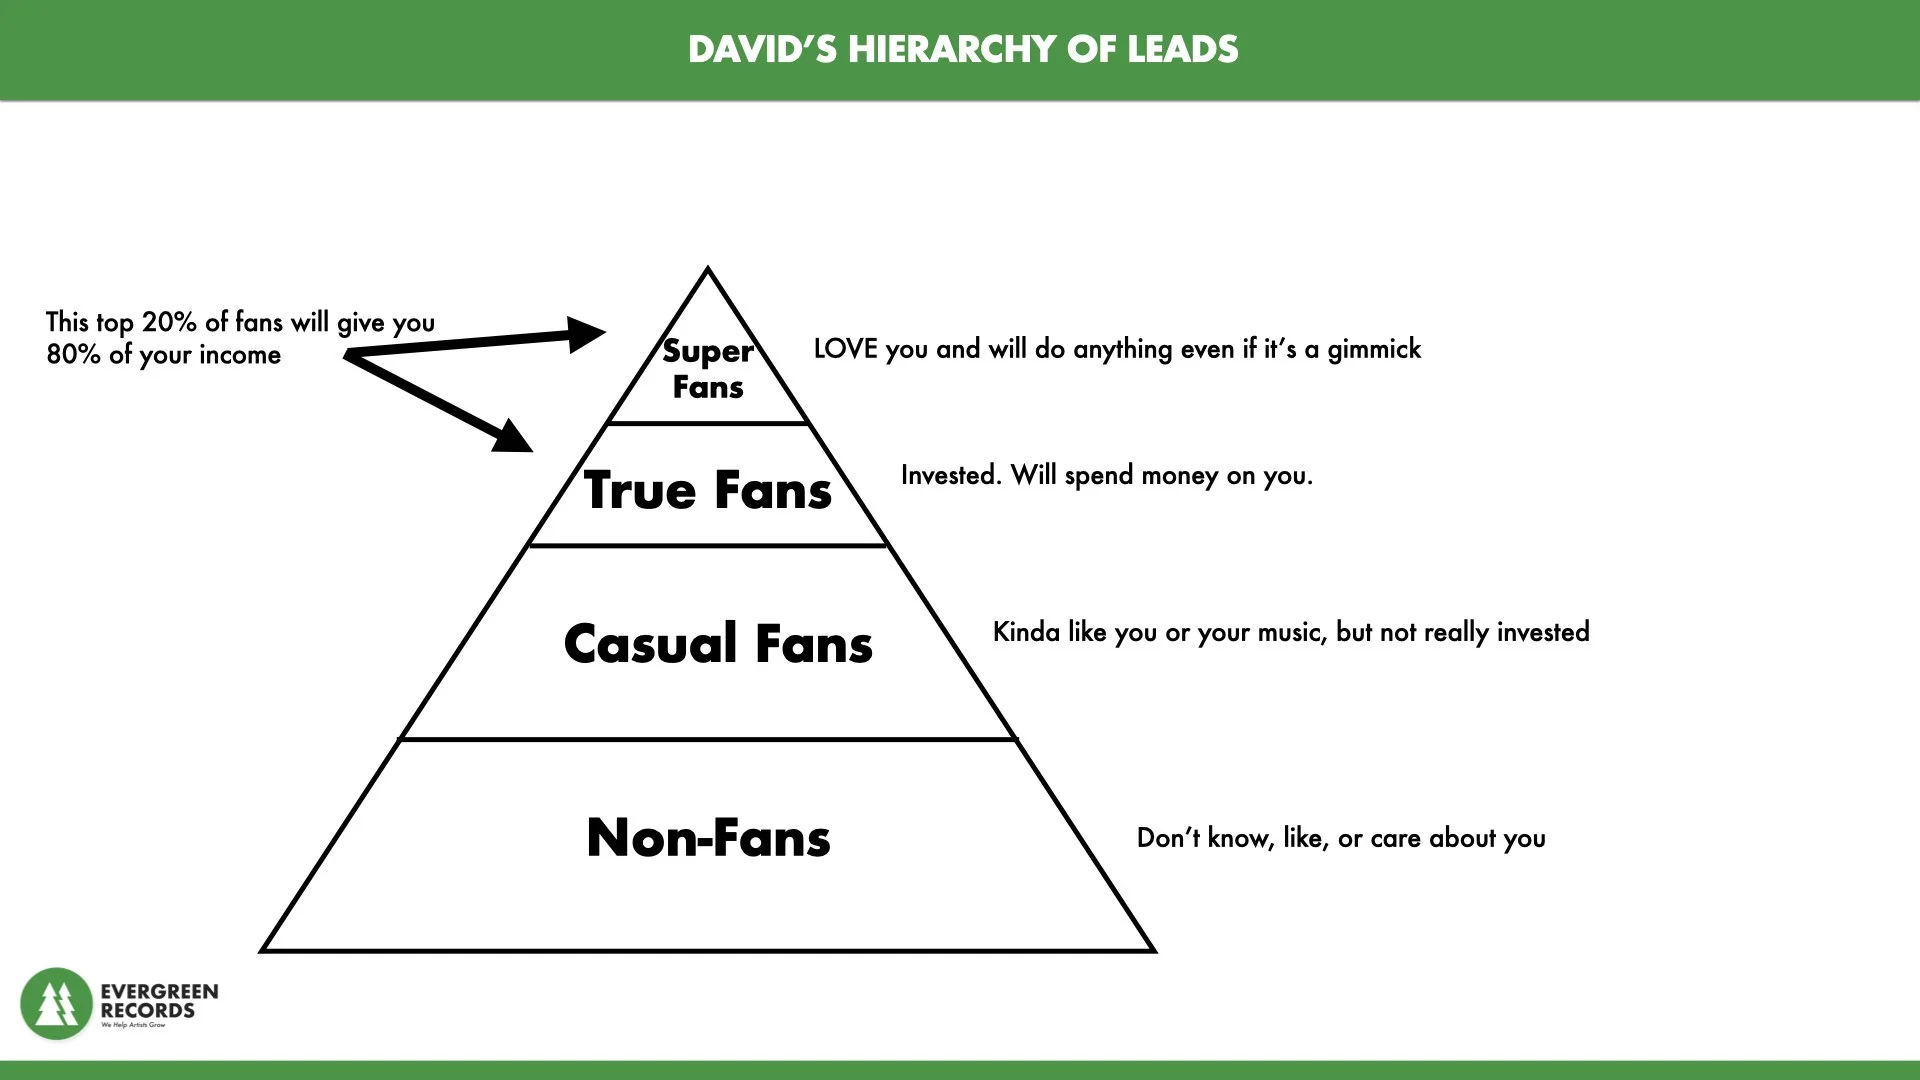 David's Hierarchy of Leads